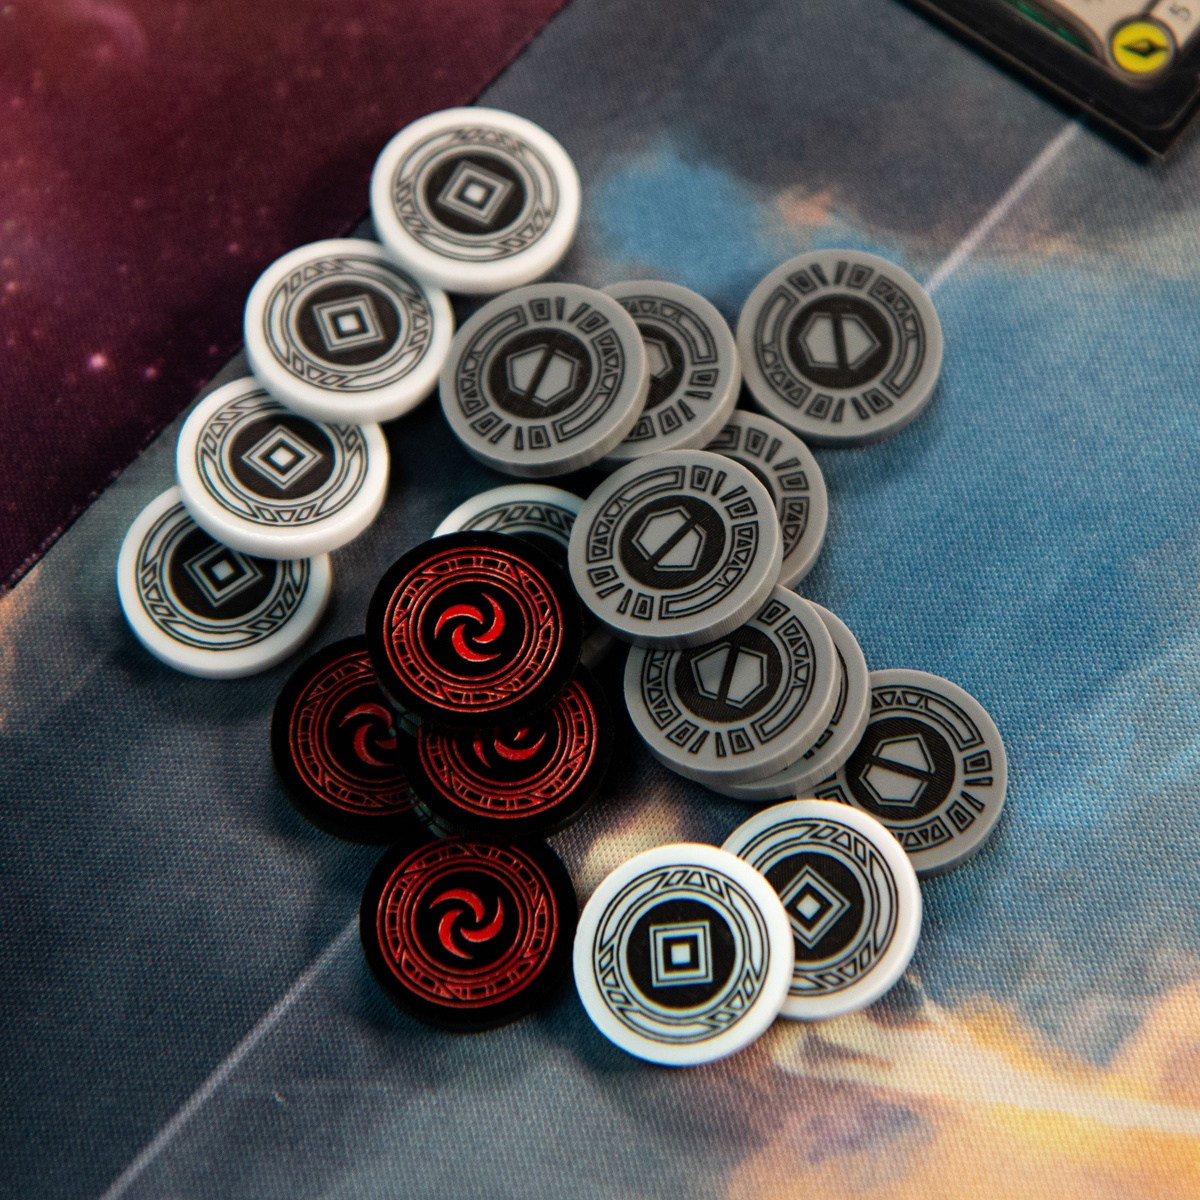 Eight Armor Tokens, seven Activation Tokens, and four Resource tokens casually jumbled together.